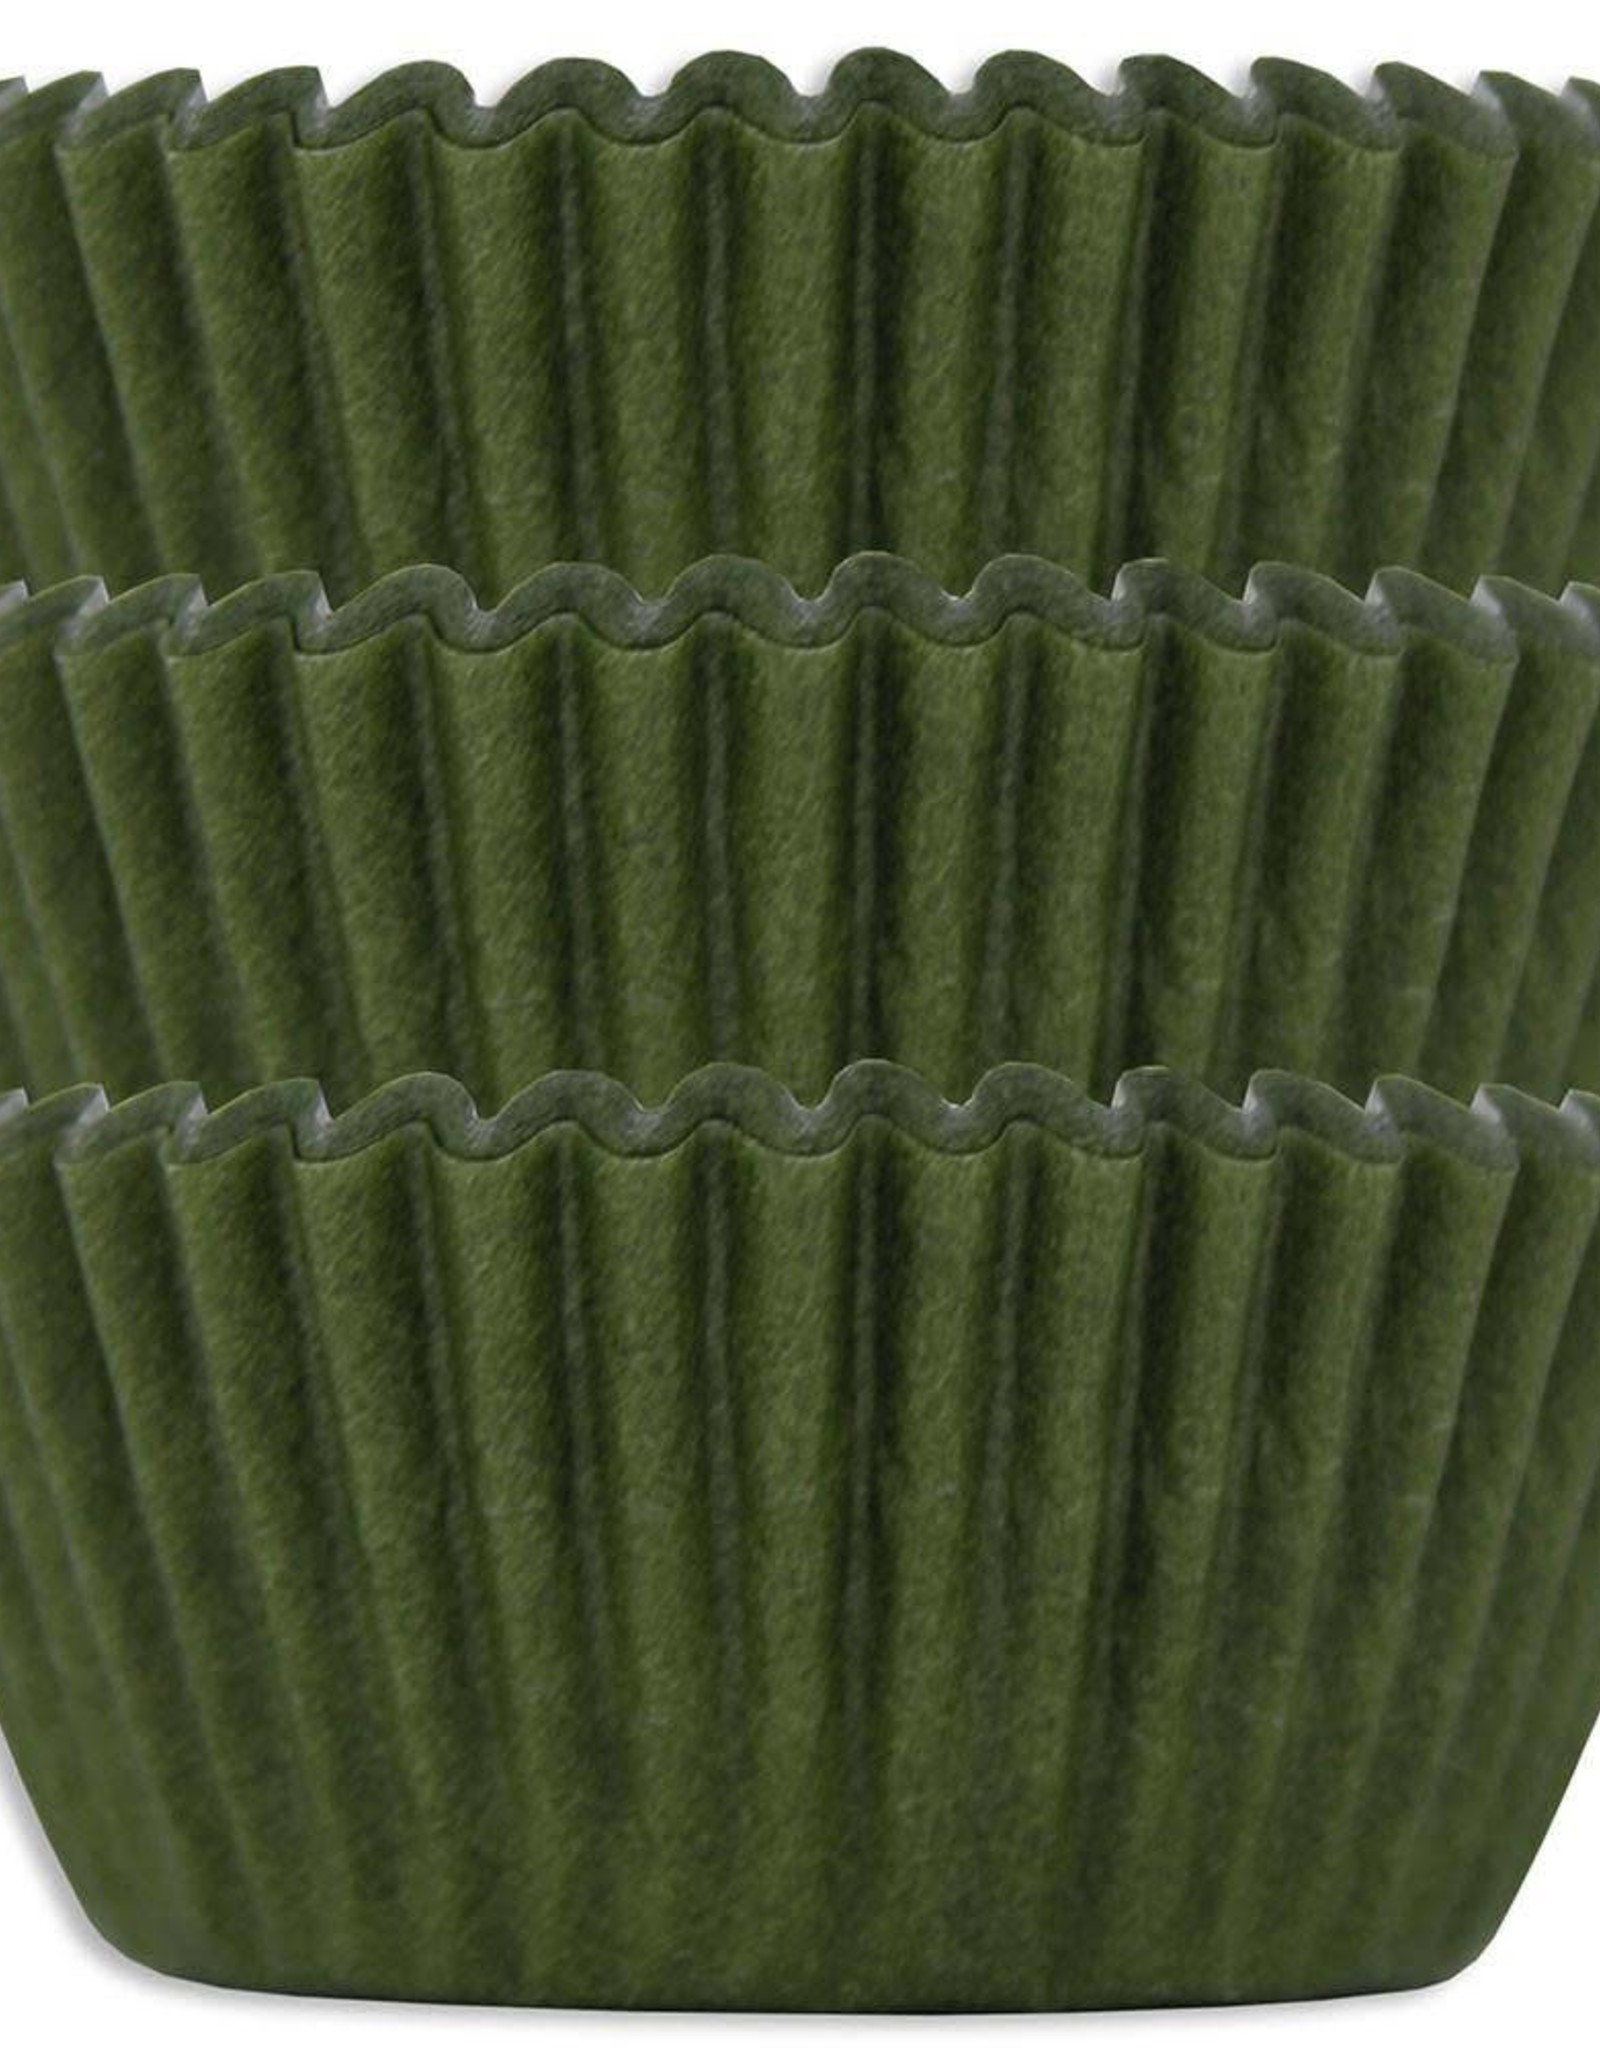 Olive Green Baking Cups (30-40ct)